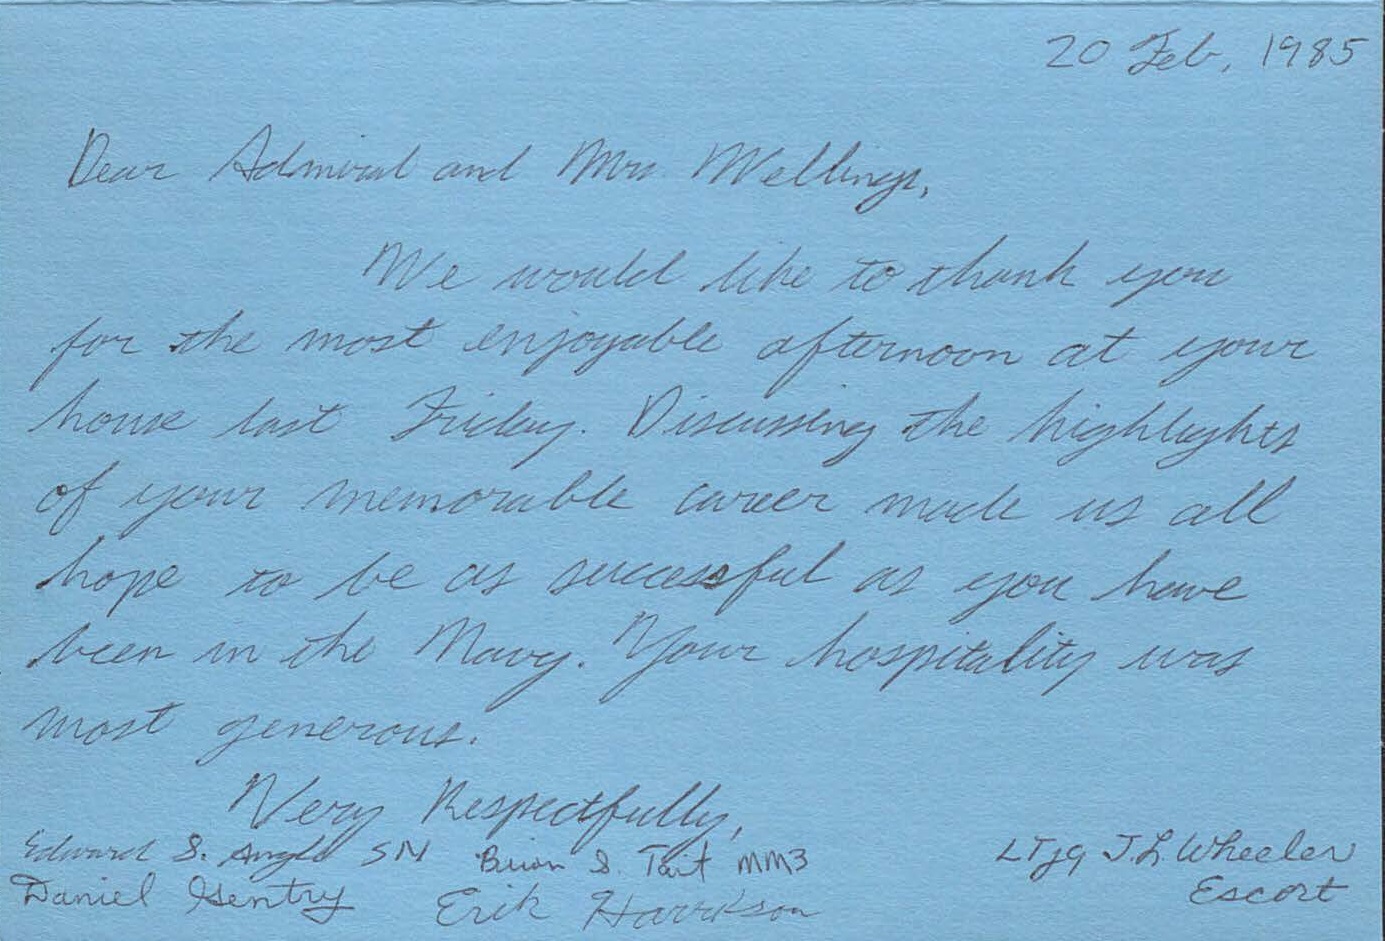 Letter from members of the NAPS battalion to RADM and Mrs. Joseph H. Wellings